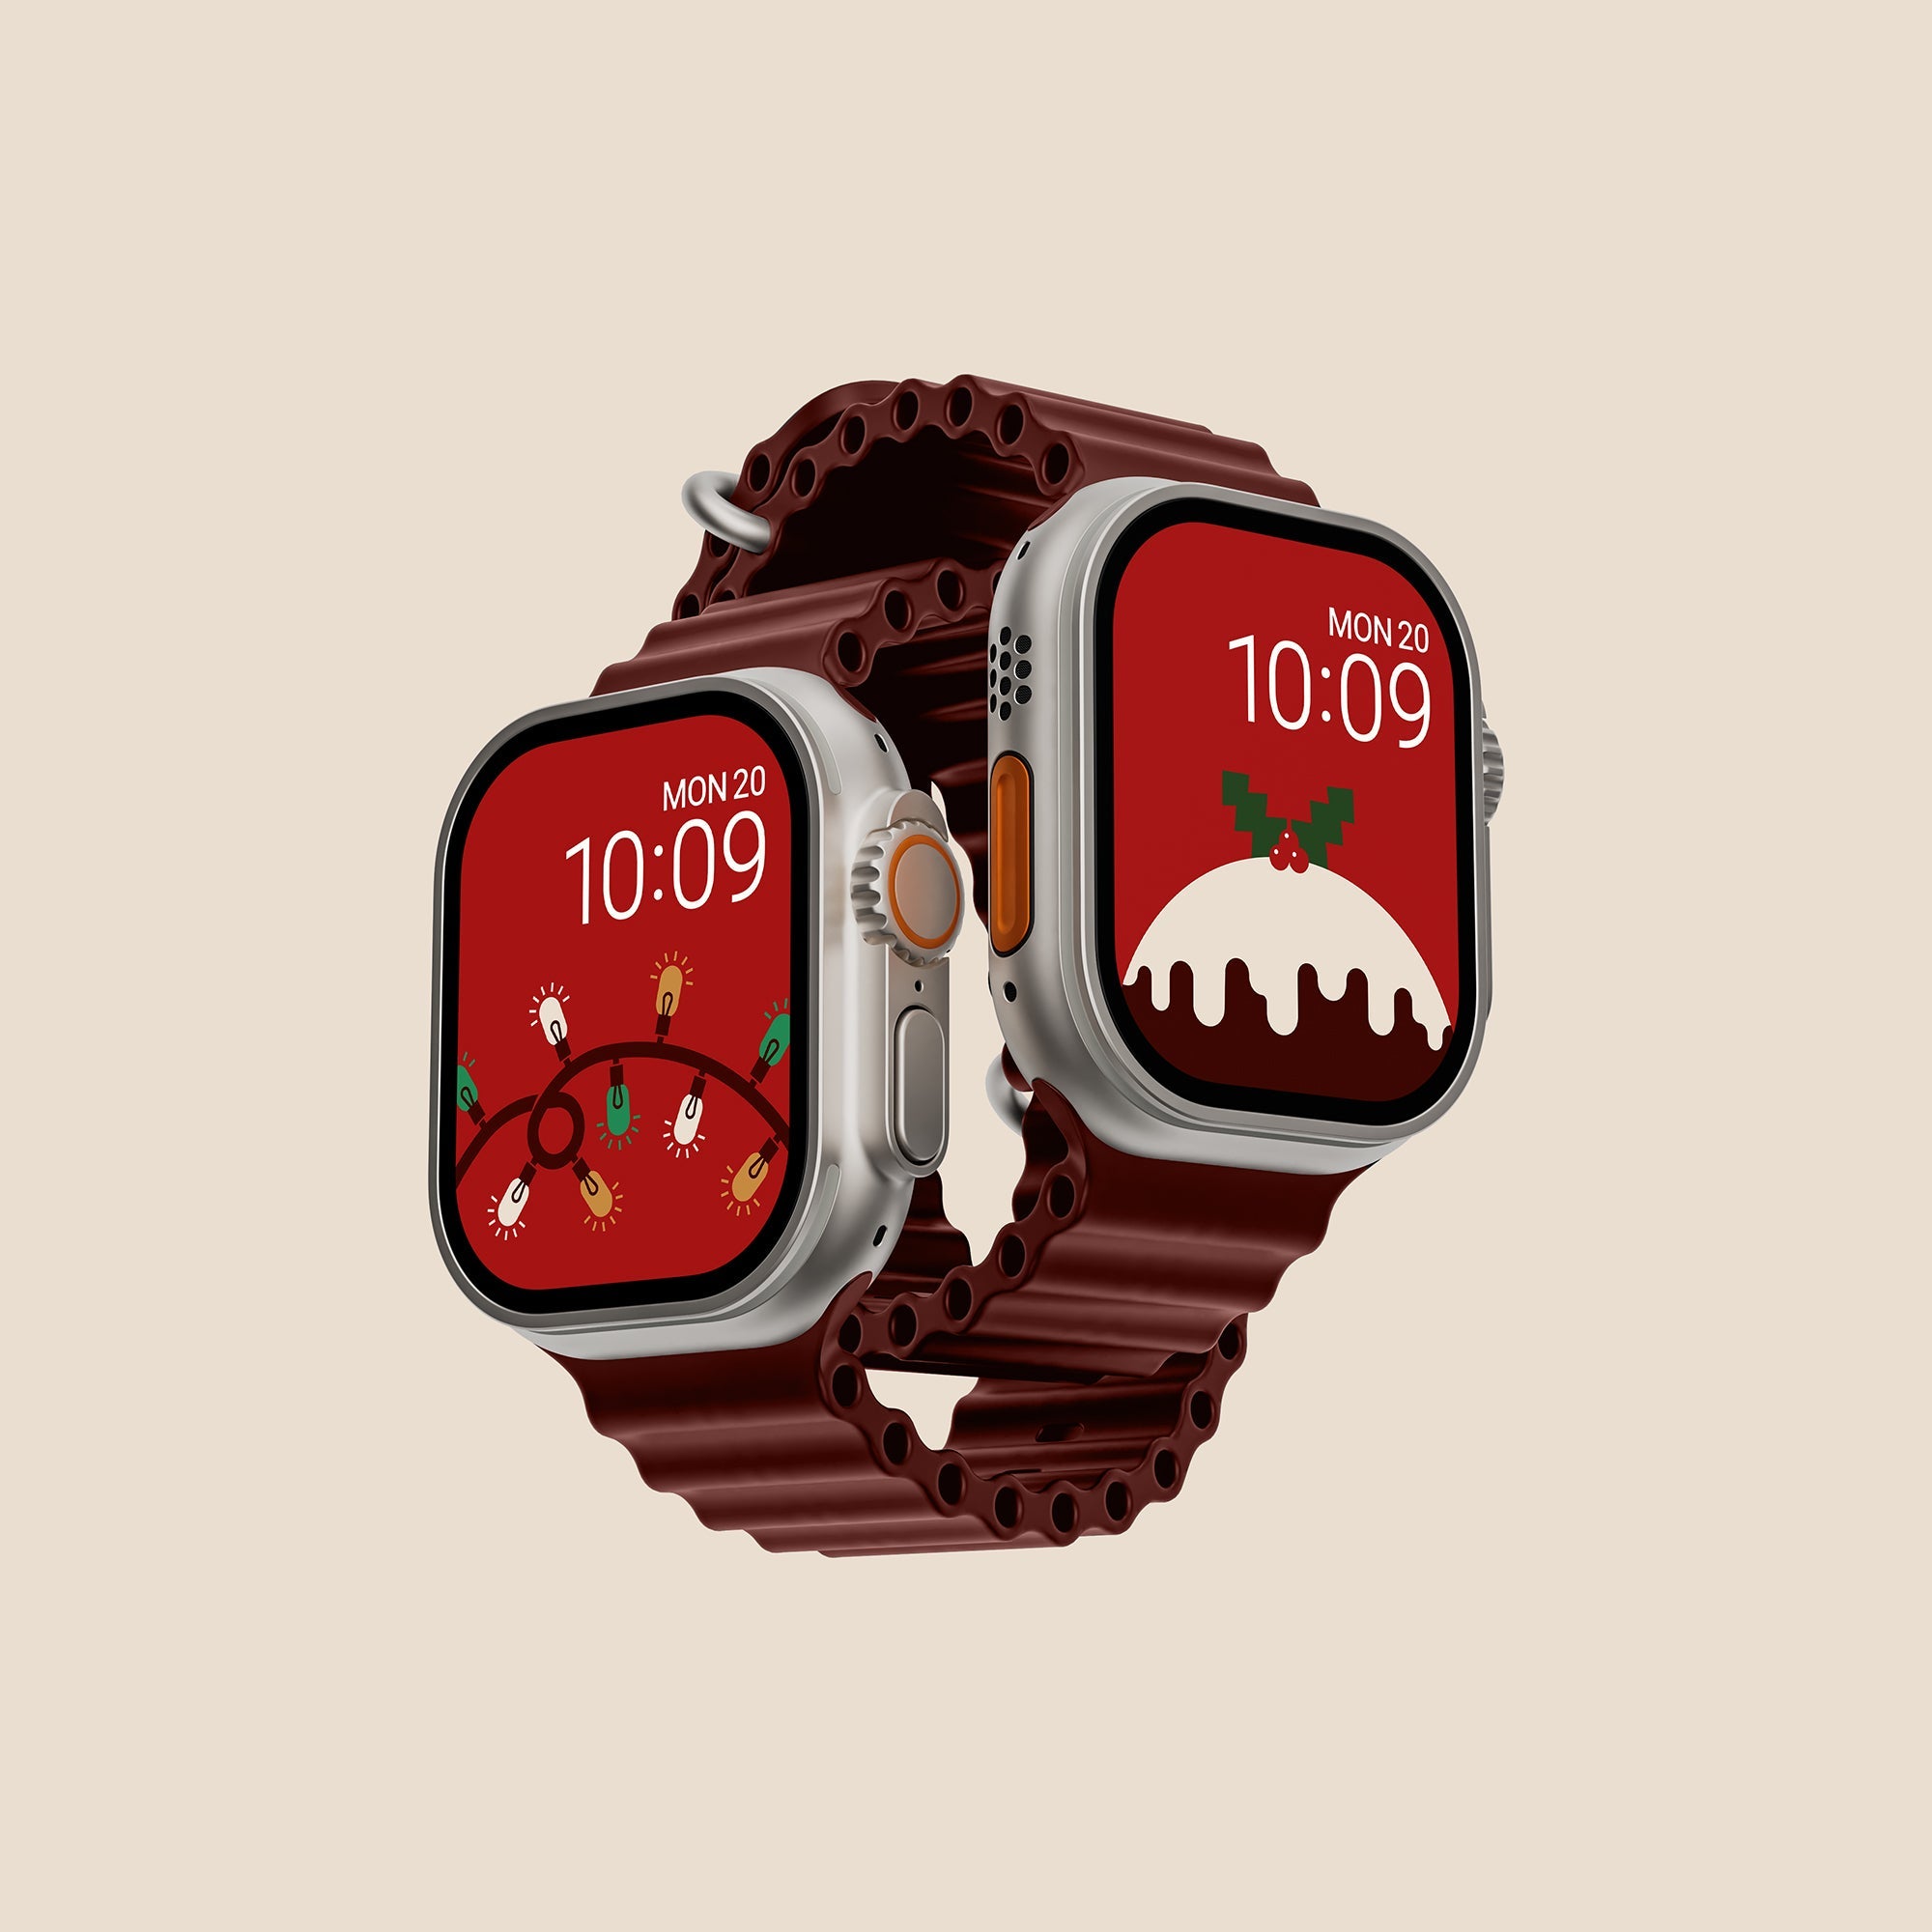 Festive Apple Watch Wallpapers (4 Pack) - Buckle and Band - FEST-CL